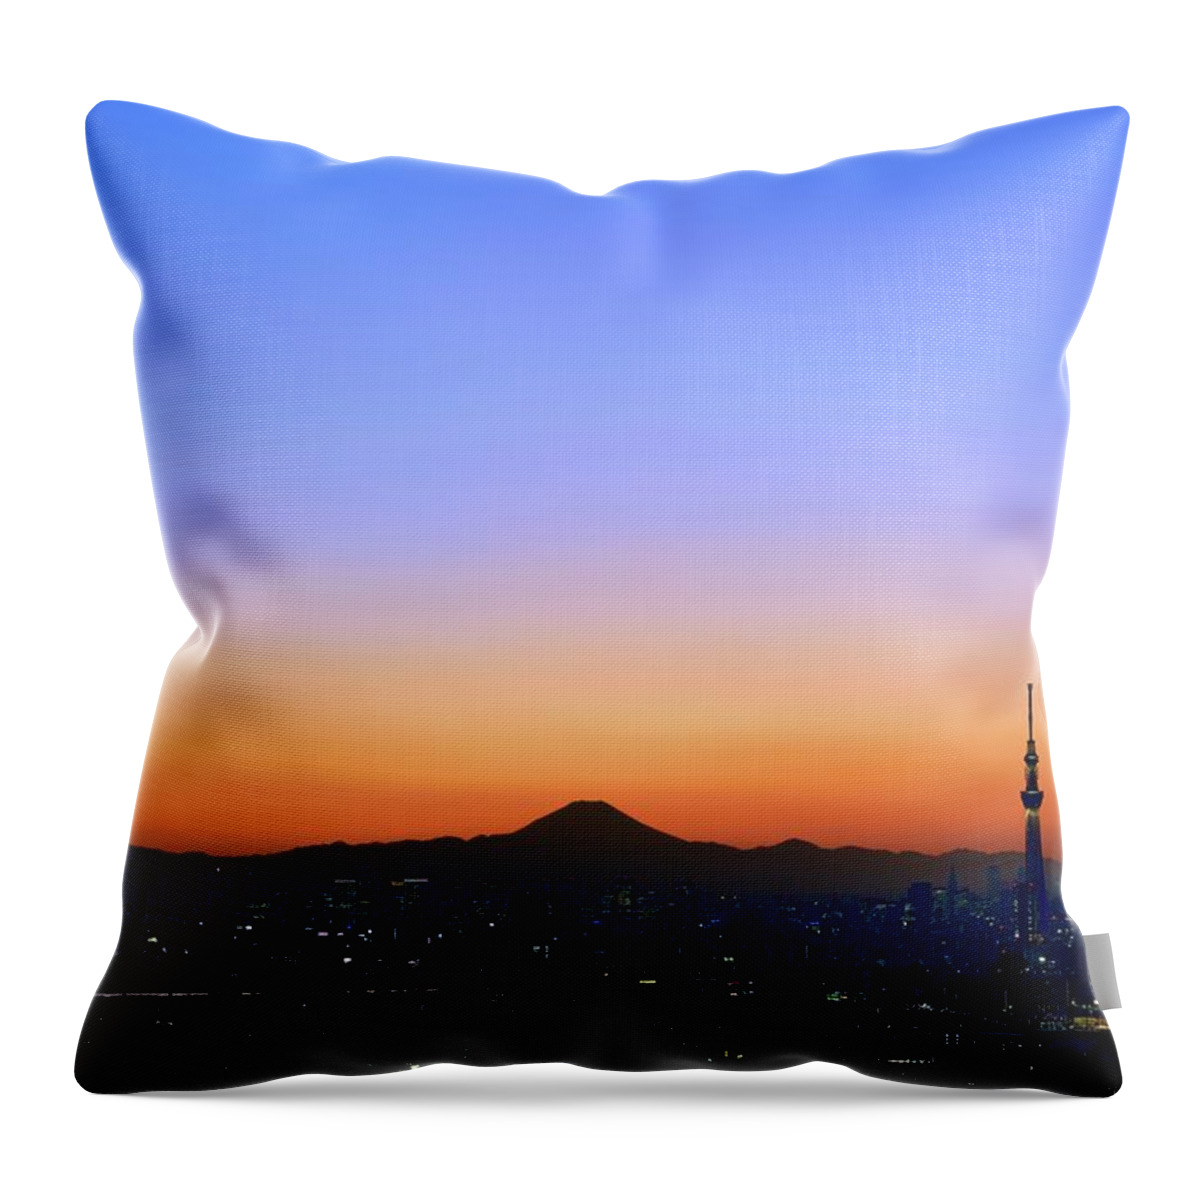 Tranquility Throw Pillow featuring the photograph Tokyo Skyline At Sunset #2 by Vladimir Zakharov